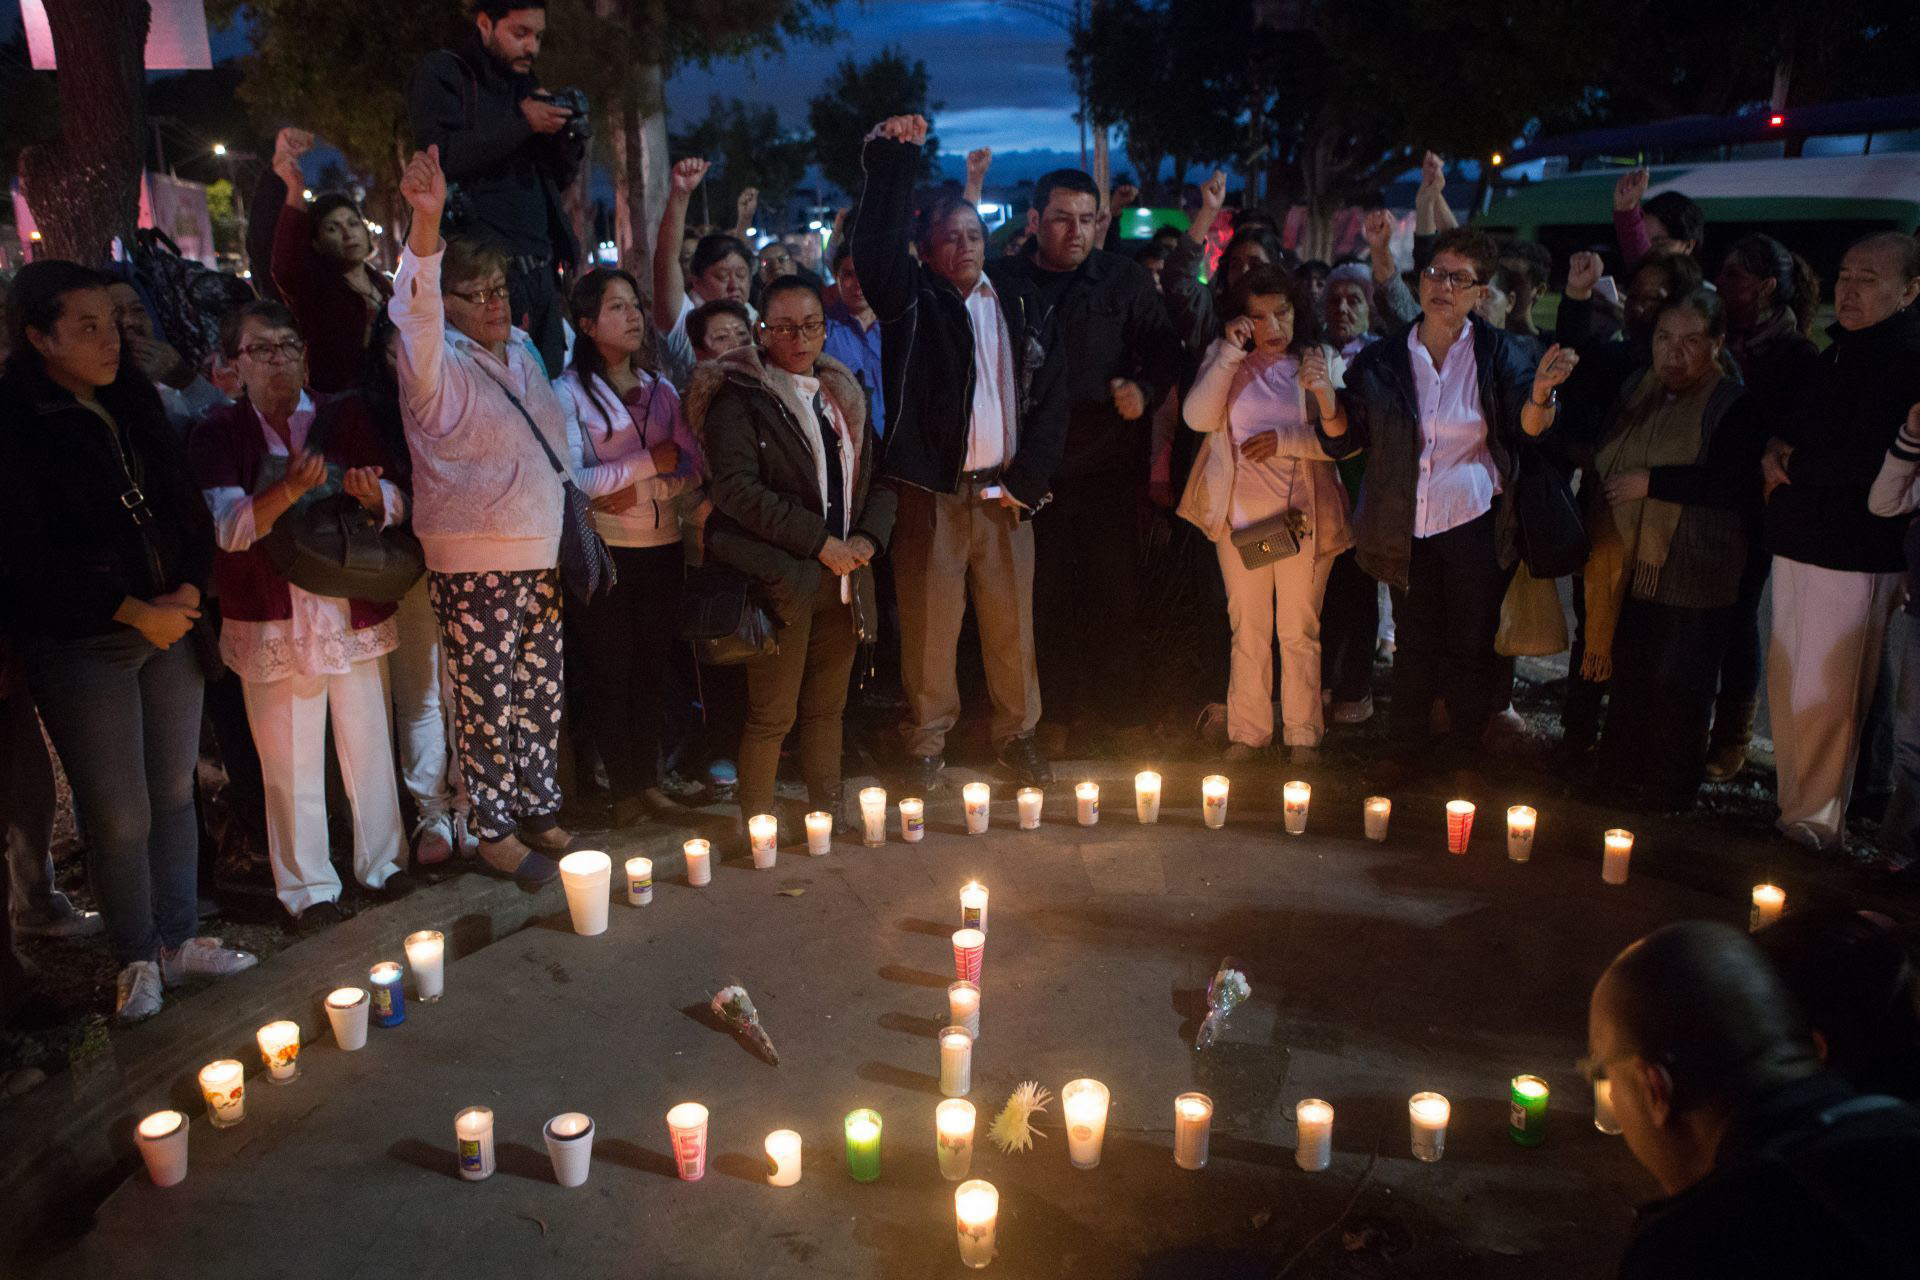 Neighbors of the Enrique Rébsamen school, made a tour of the Monument to the Family to Miramontes avenue with candles in mourning tribute (TERCERO DÍAZ / CUARTOSCURO)